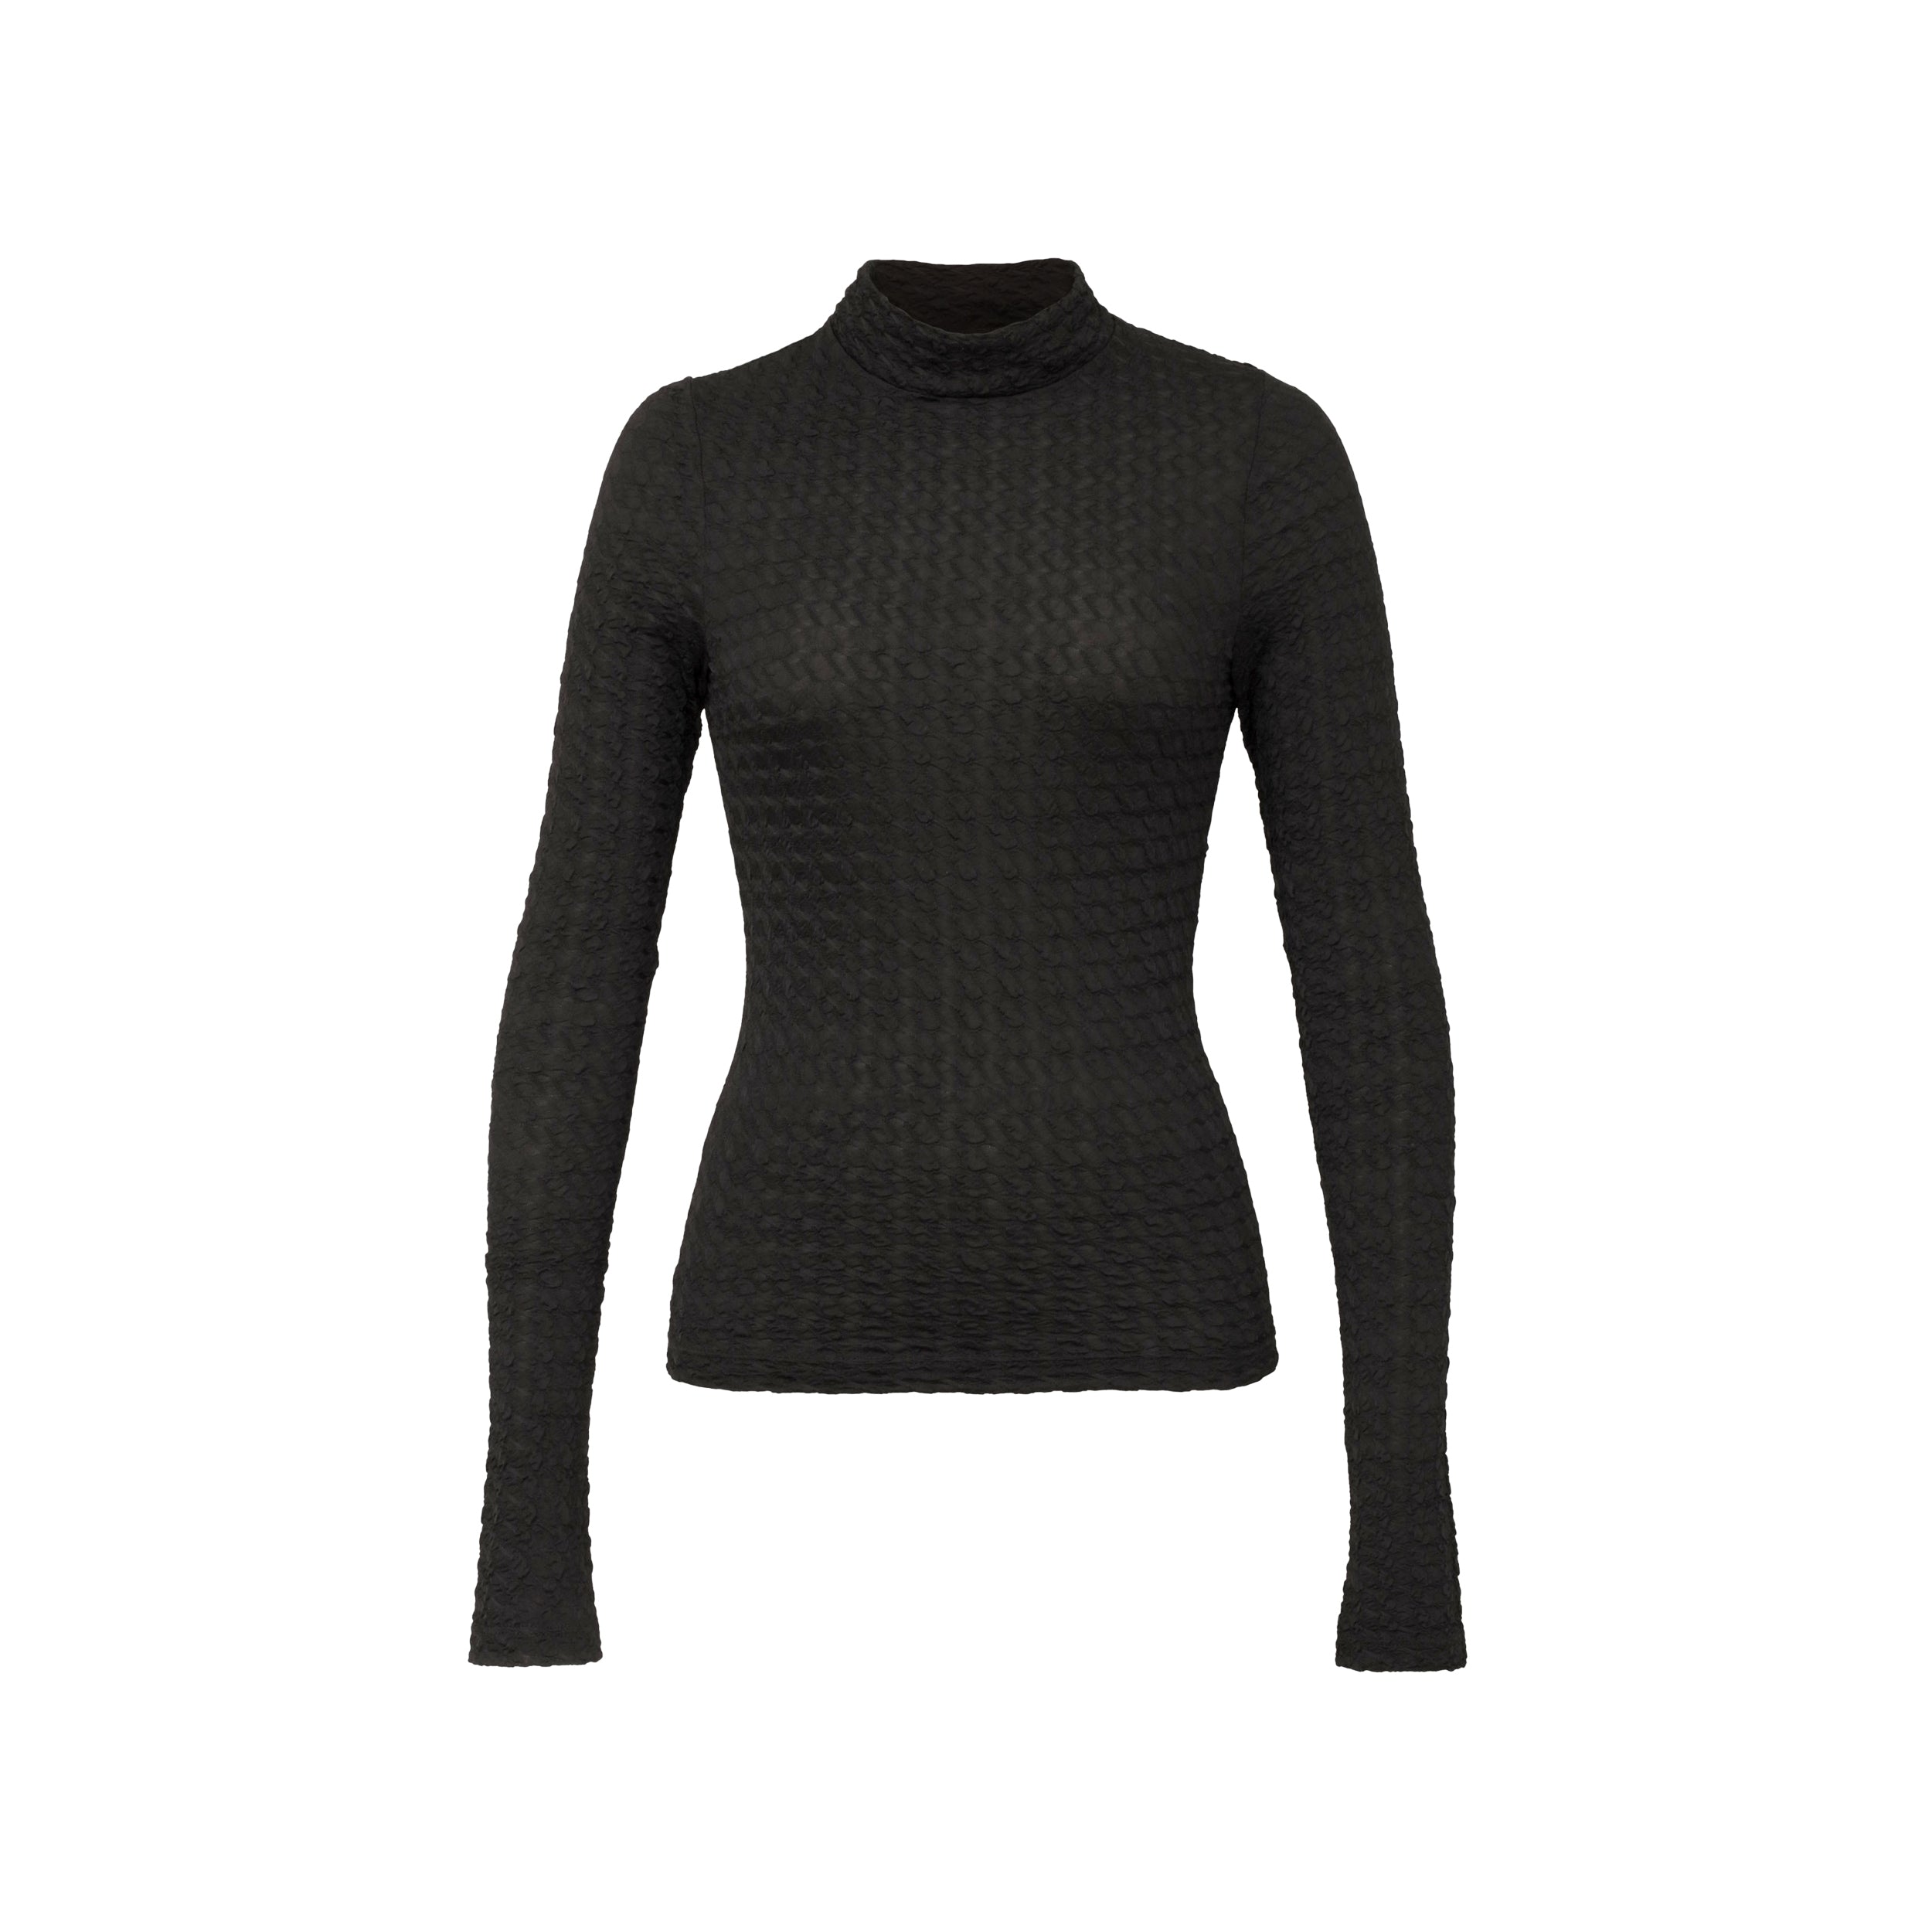 Front view of black stretch mesh textured turtleneck sweater